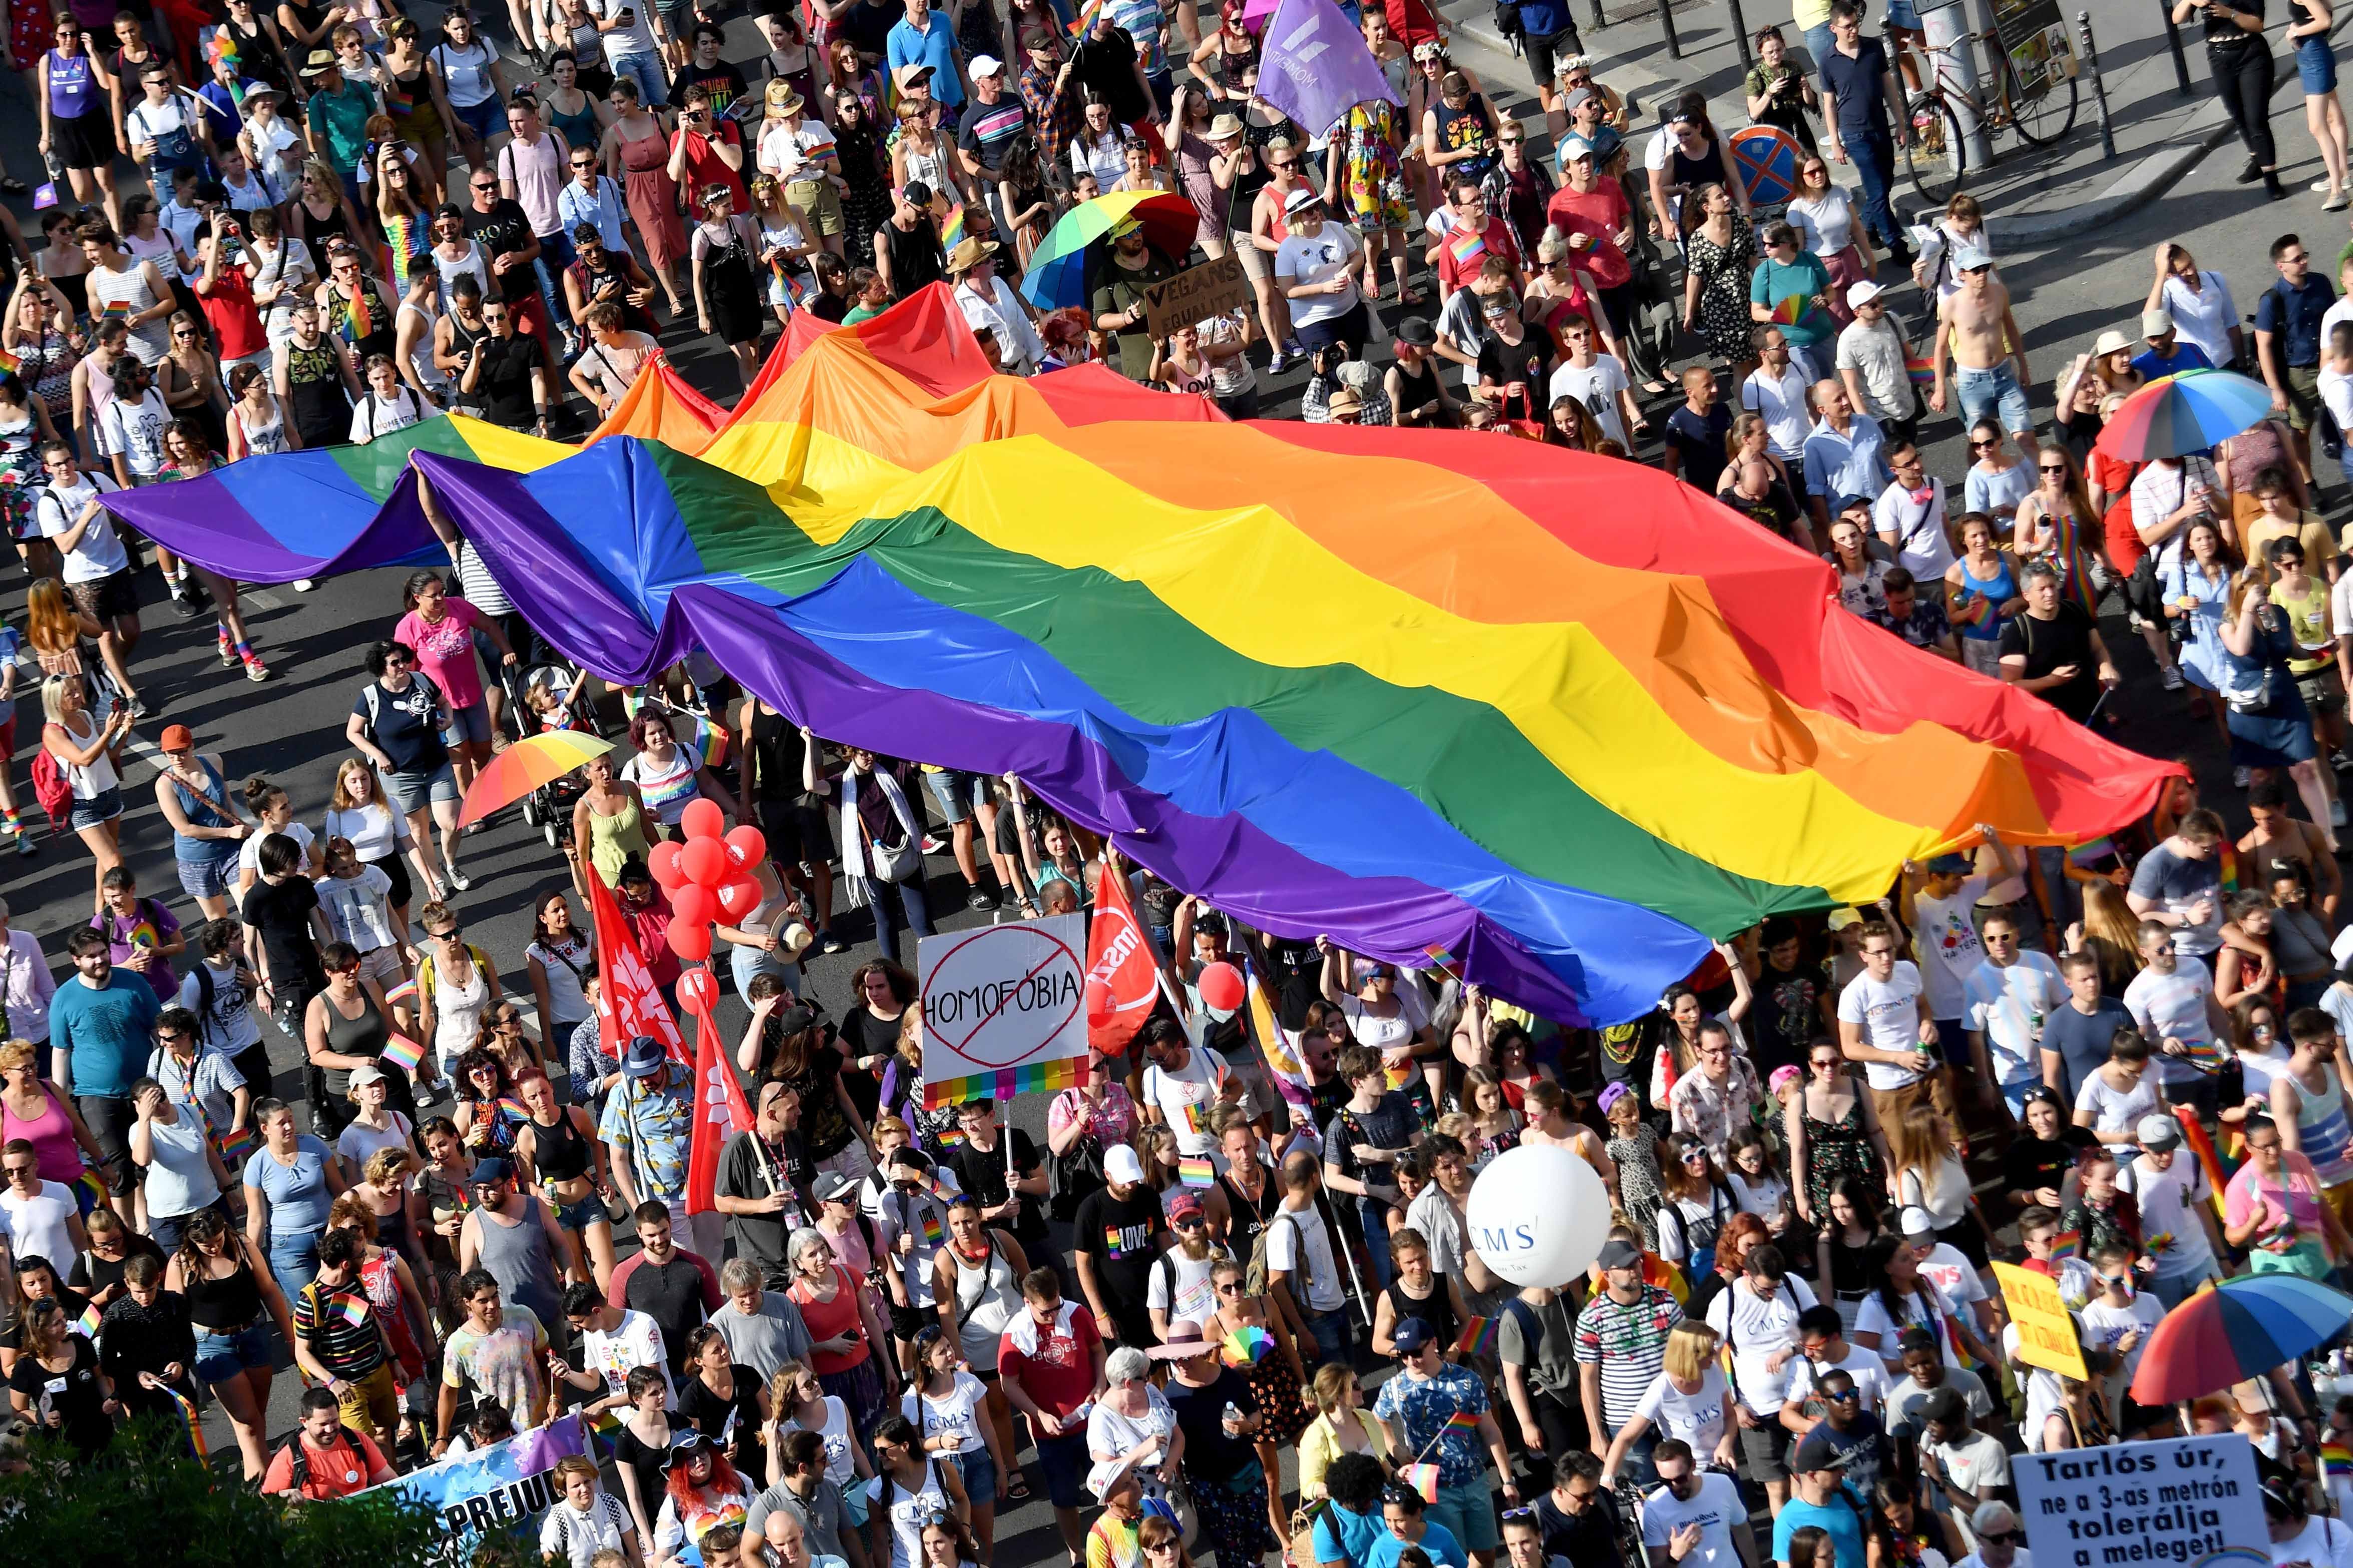 People march with a giant rainbow flag from the parliament building in Budapest during the lesbian, gay, bisexual and transgender (LGBT) Pride Parade on July 6, 2019.